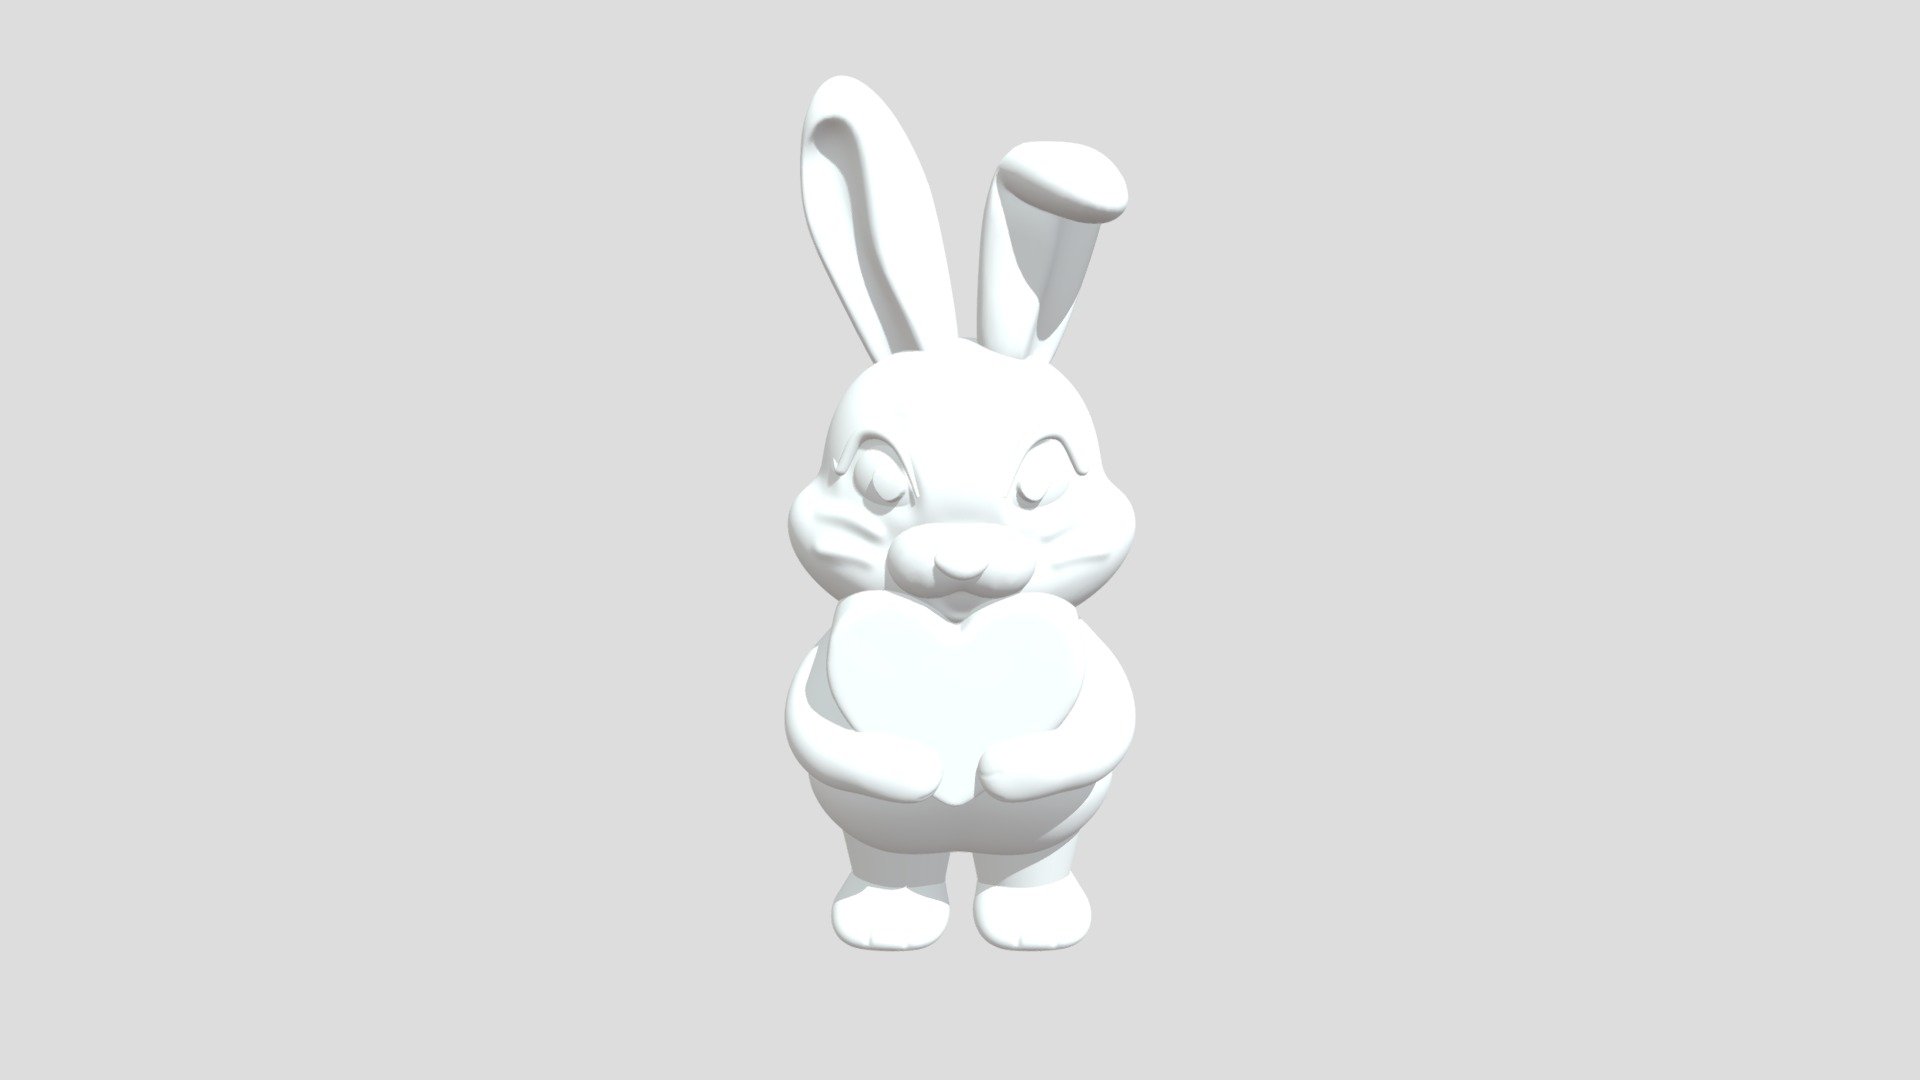 fan made .. its free bro - Bunnies new jeans - 3D model by Poser poser poser (@poserposerposer) 3d model